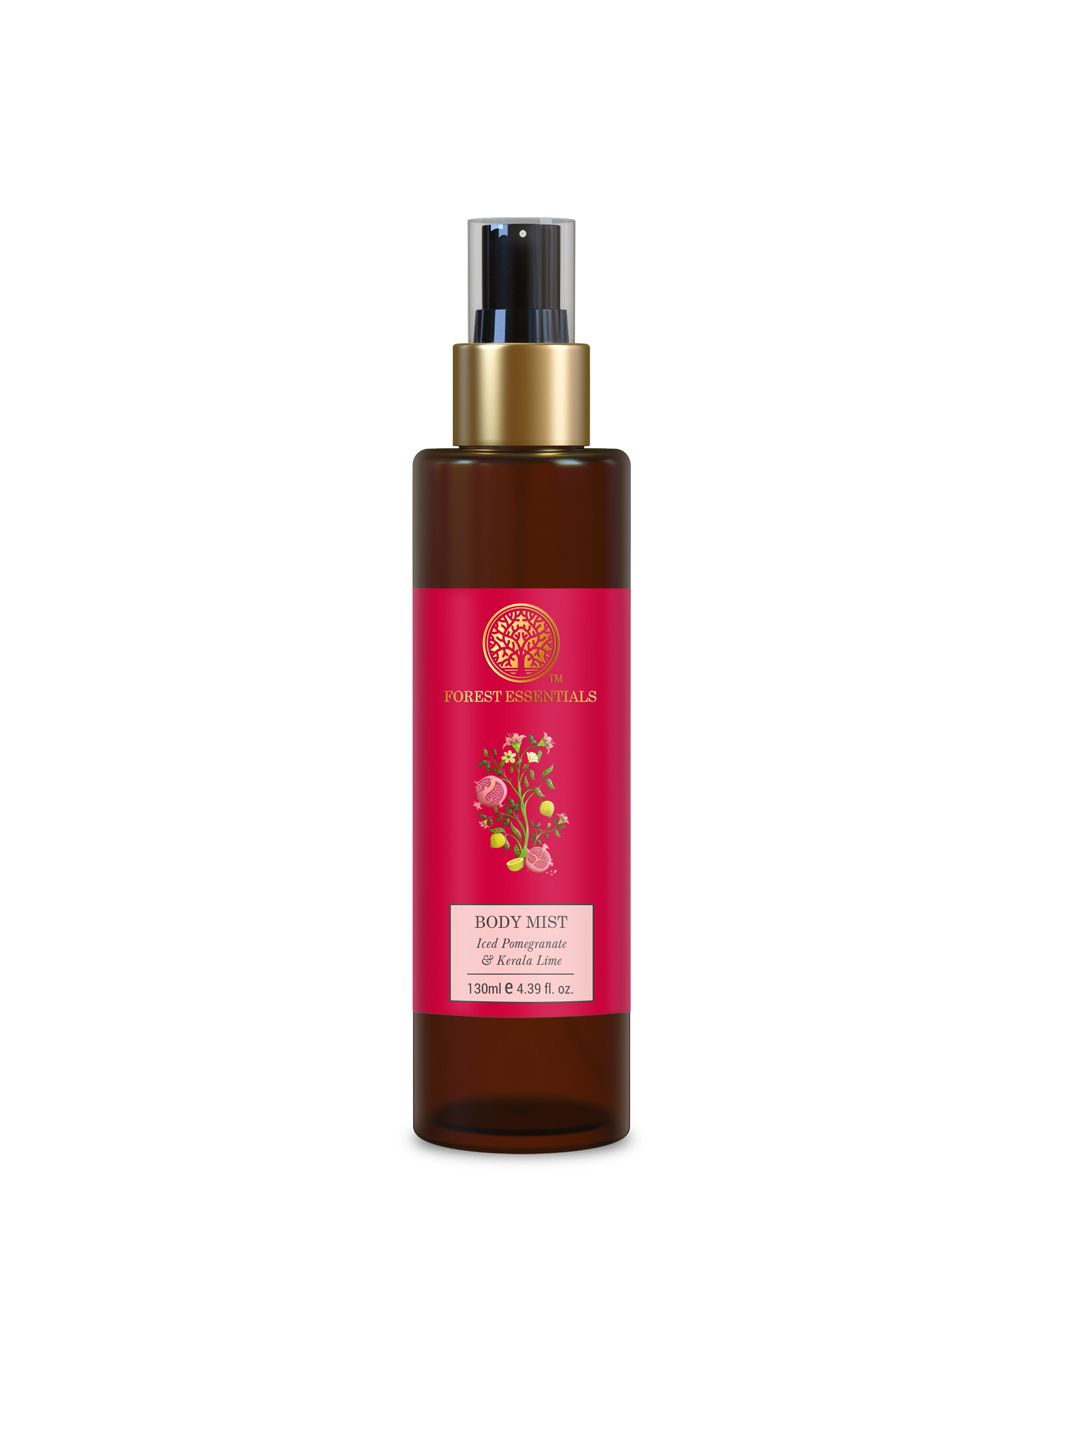 Forest Essentials Body Mist Iced Pomegranate & Kerala Lime spray 130ml Price in India